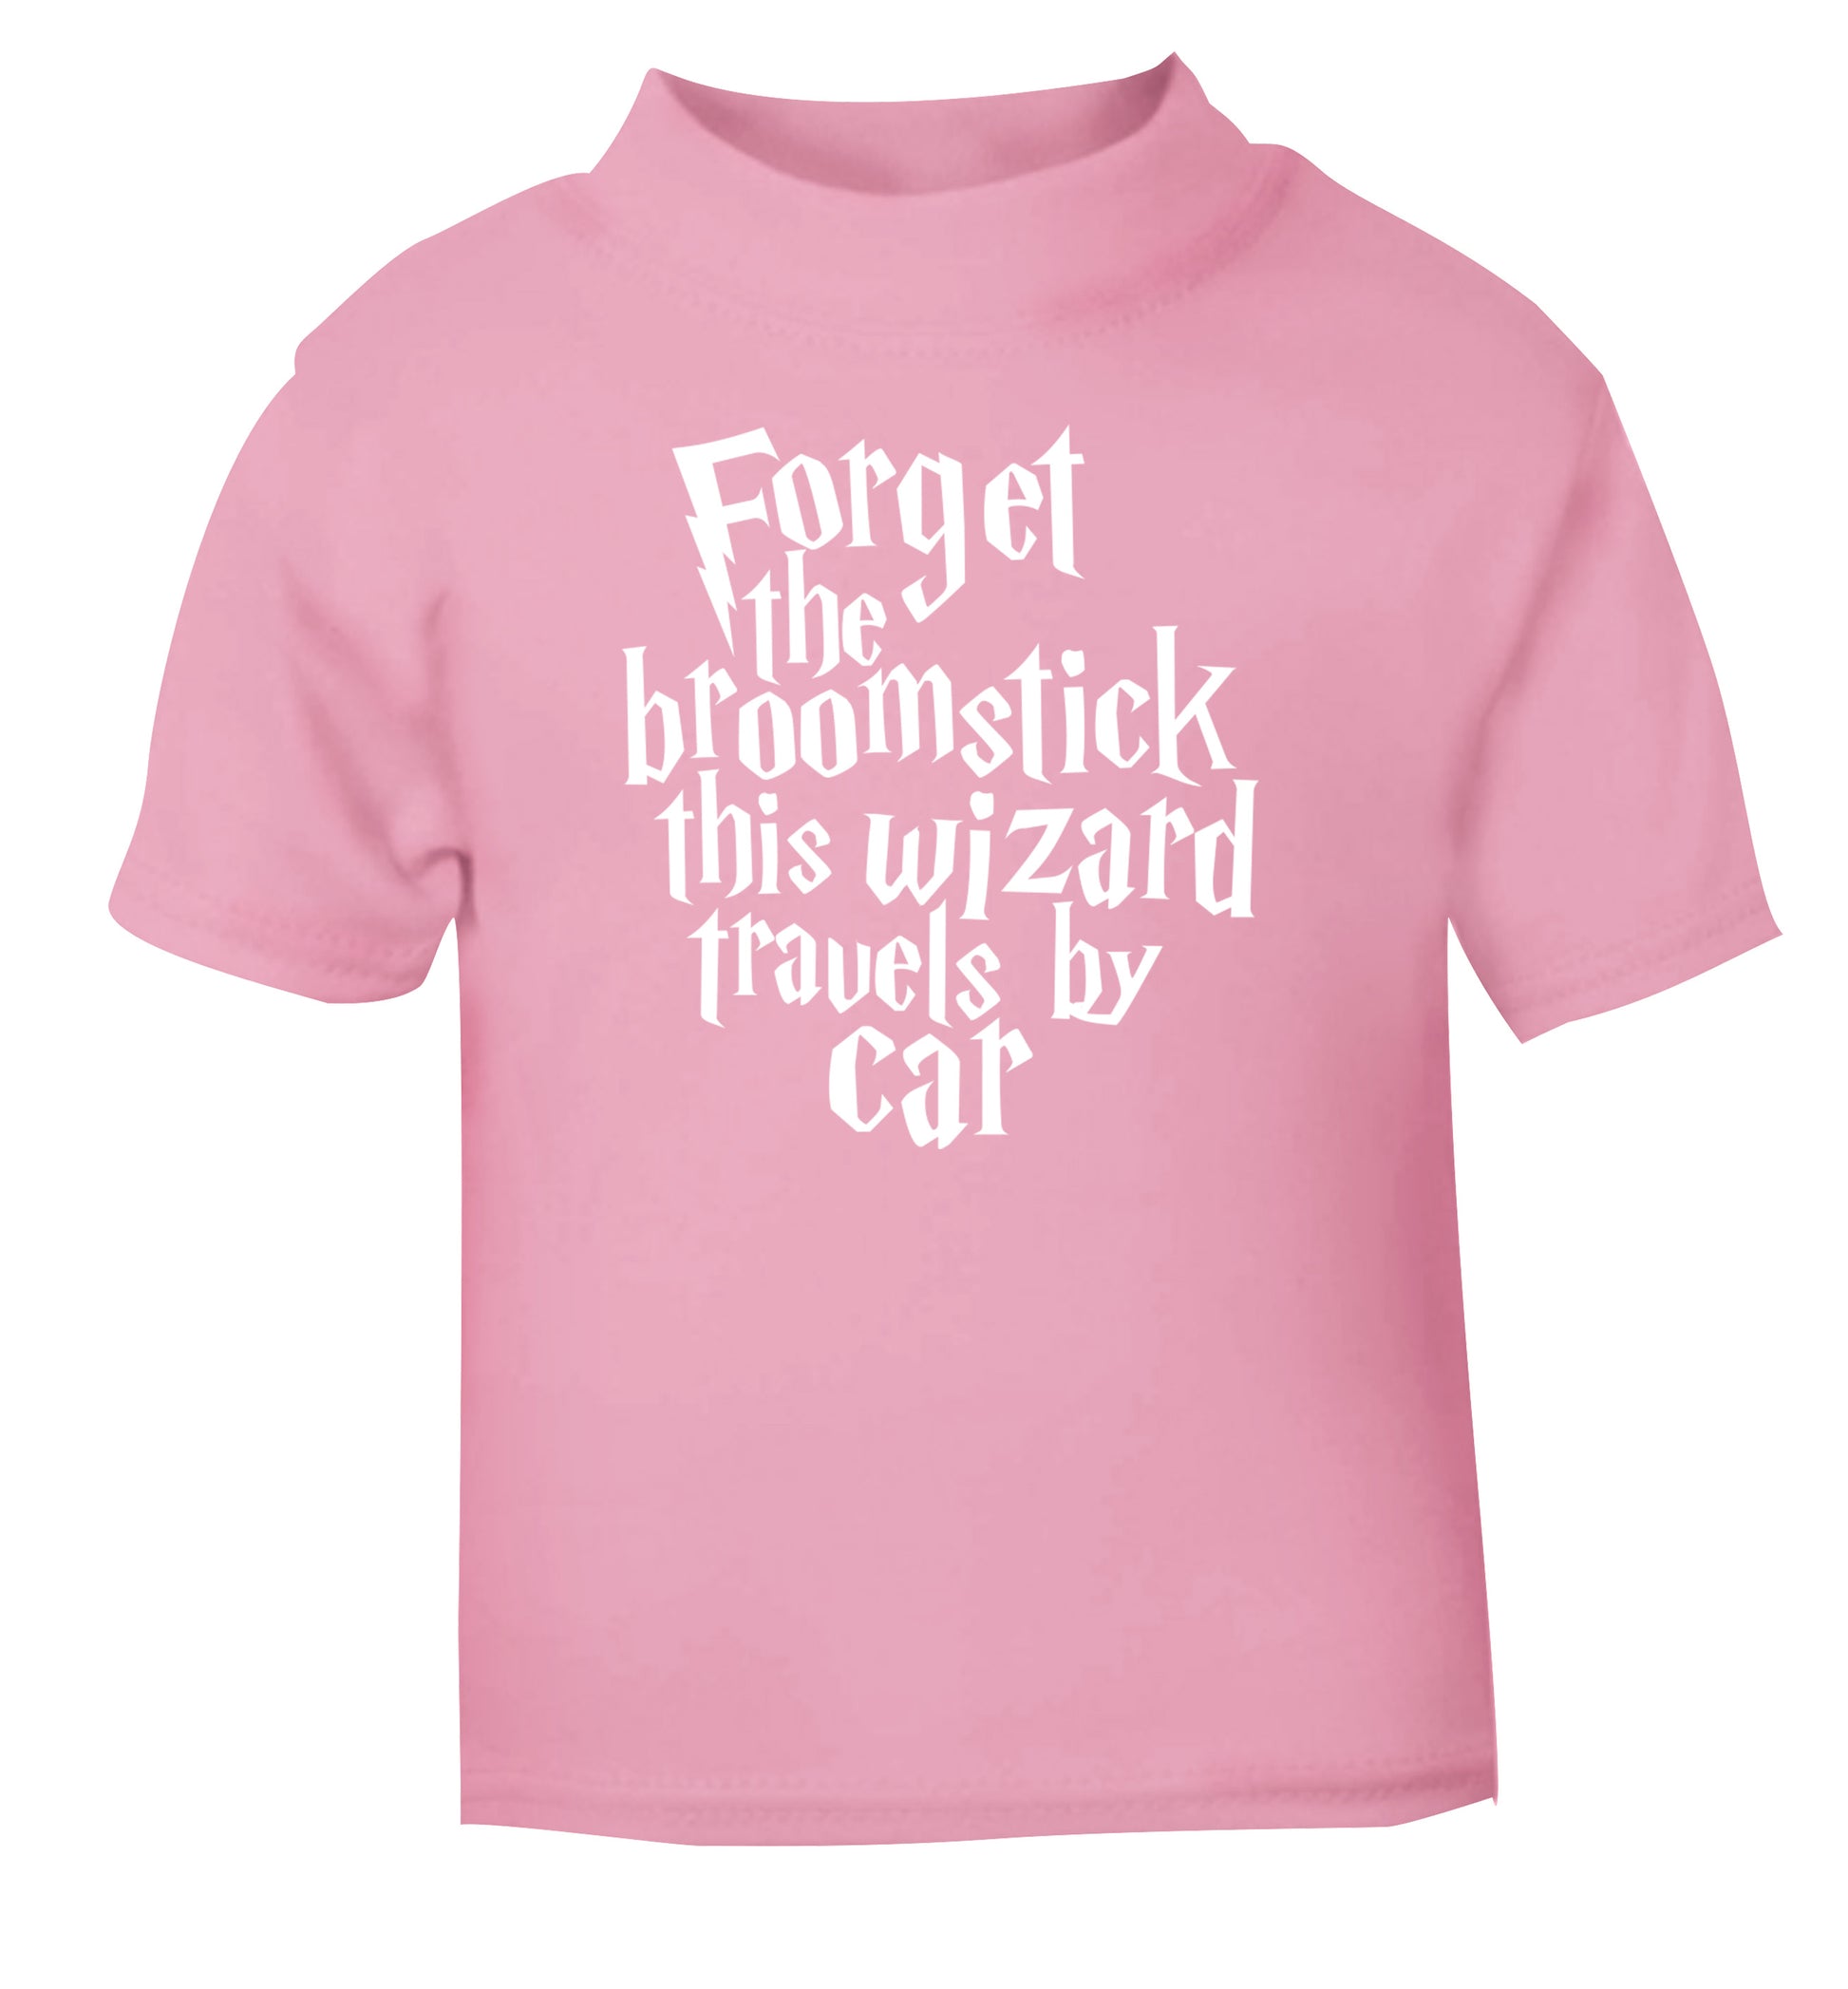 Forget the broomstick this wizard travels by car light pink Baby Toddler Tshirt 2 Years